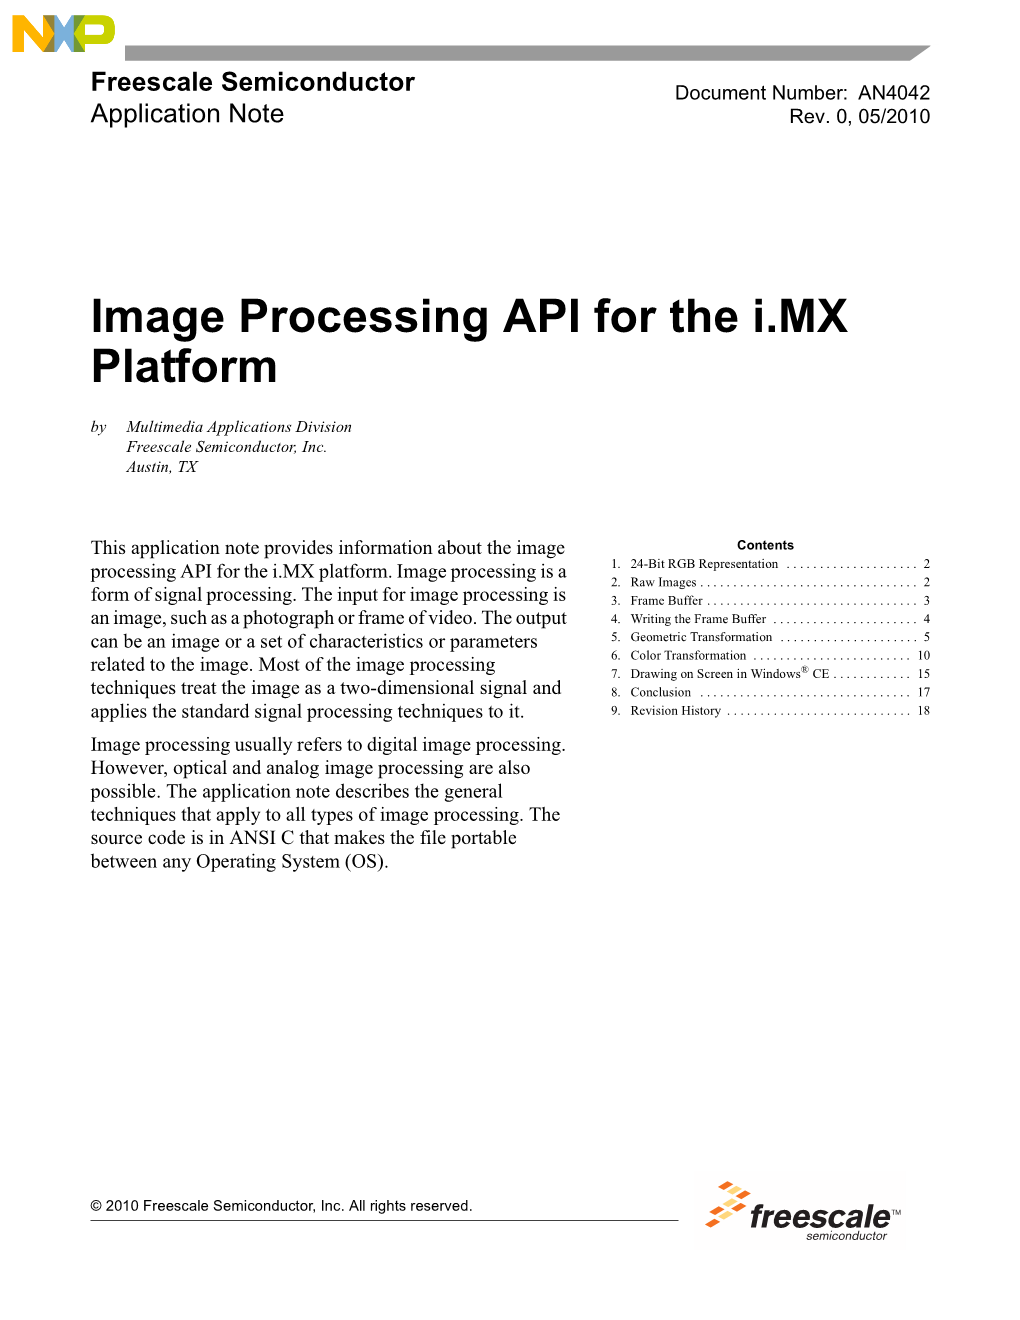 Image Processing API for the I.MX Platform by Multimedia Applications Division Freescale Semiconductor, Inc